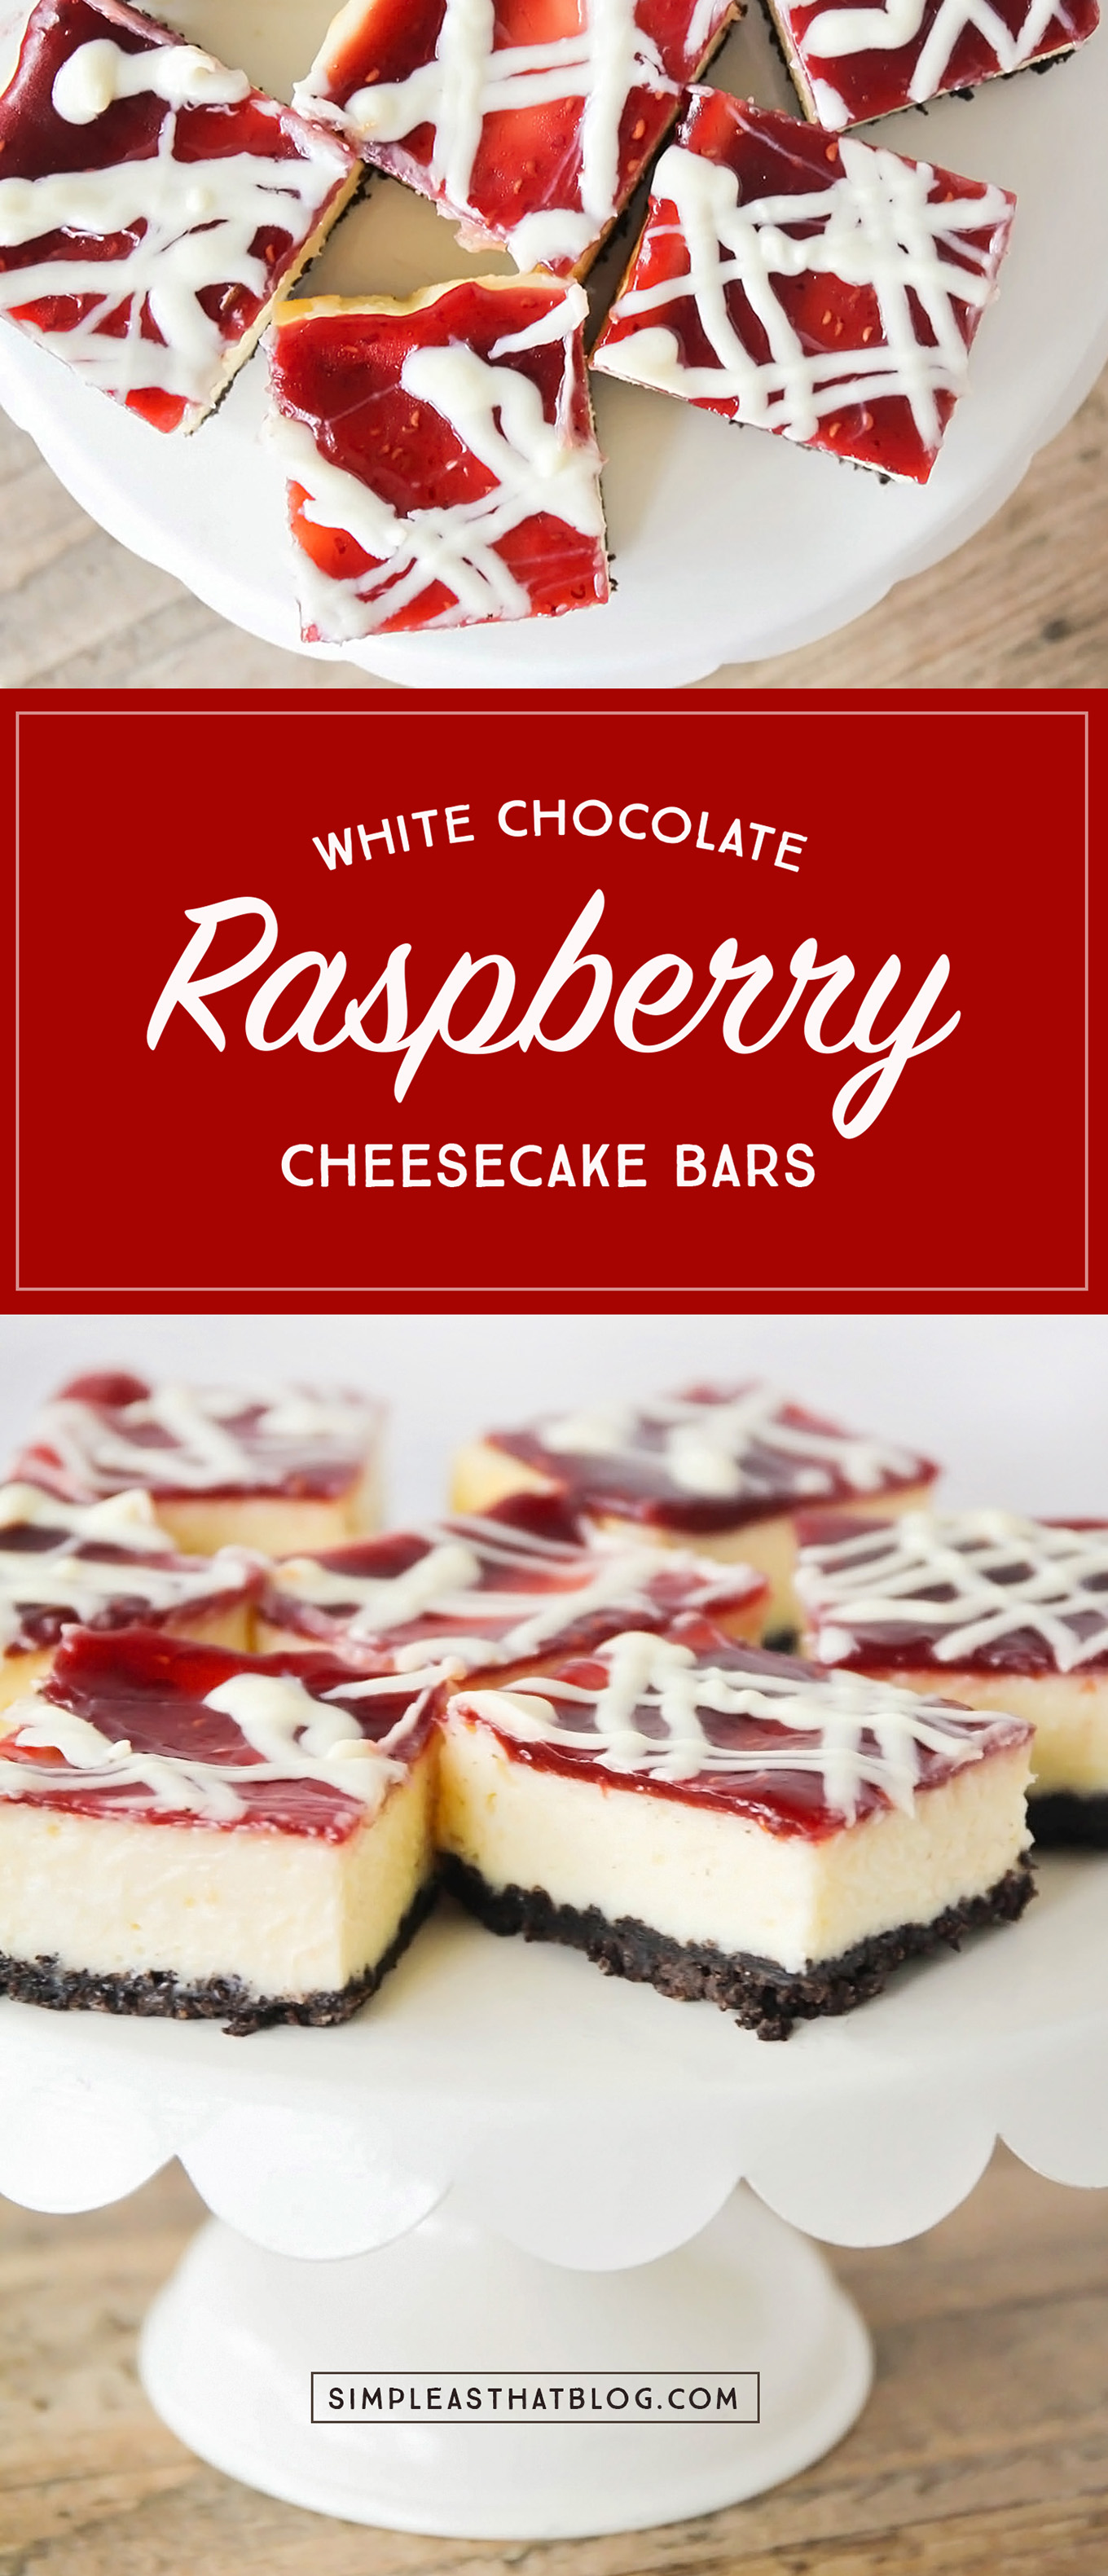 These White Chocolate Raspberry Cheesecake Bars don't just look fancy they taste fancy too! The white chocolate and raspberry flavors paired with a homemade oreo crust make them hard to resist.